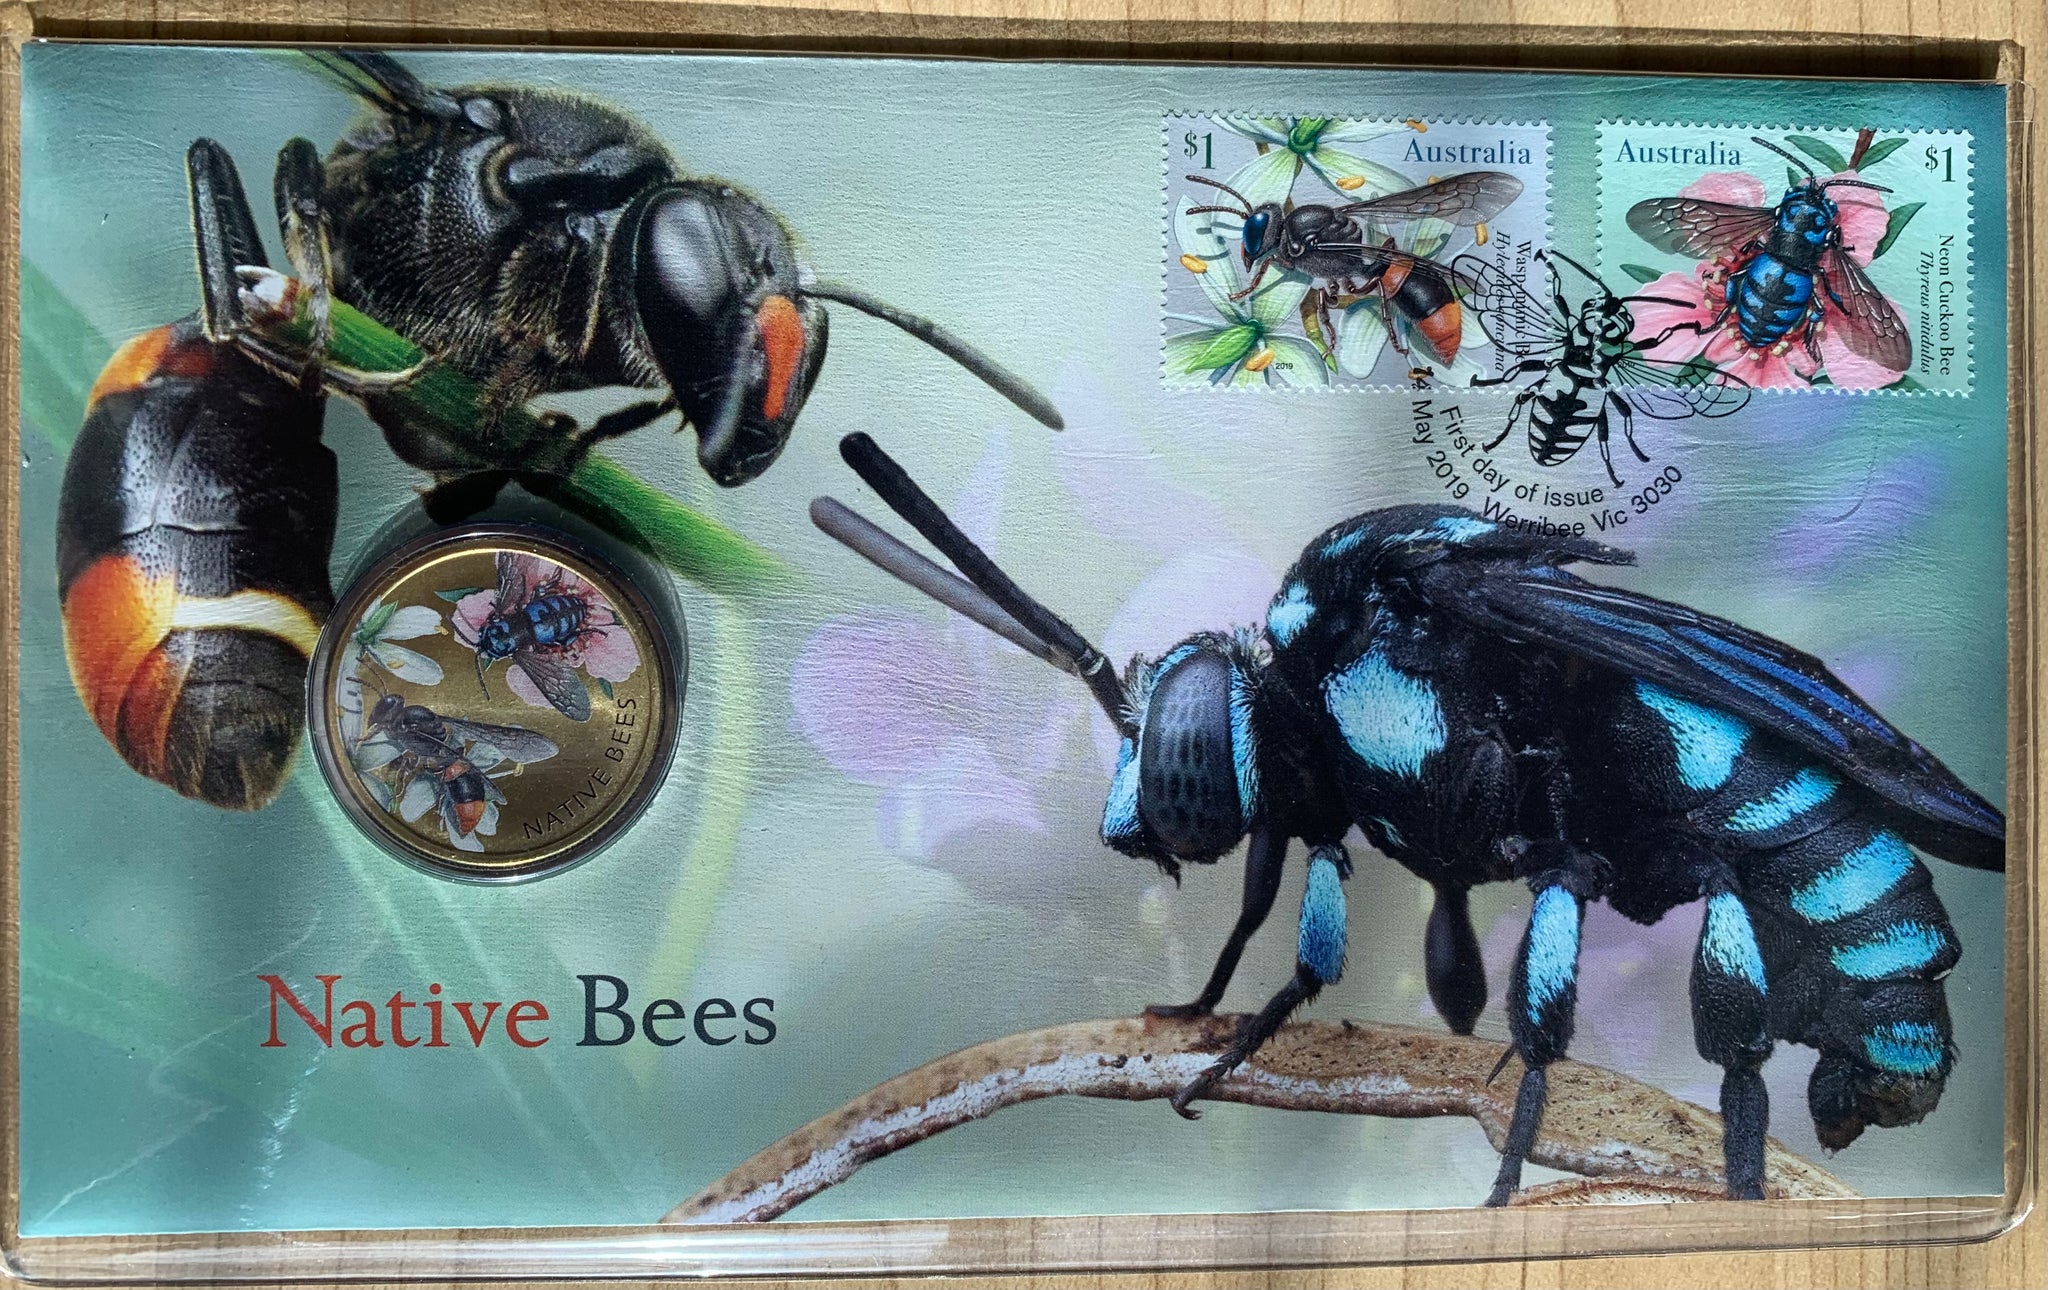 Australia 2019 Native Bees PNC with Tuvalu $1 coin